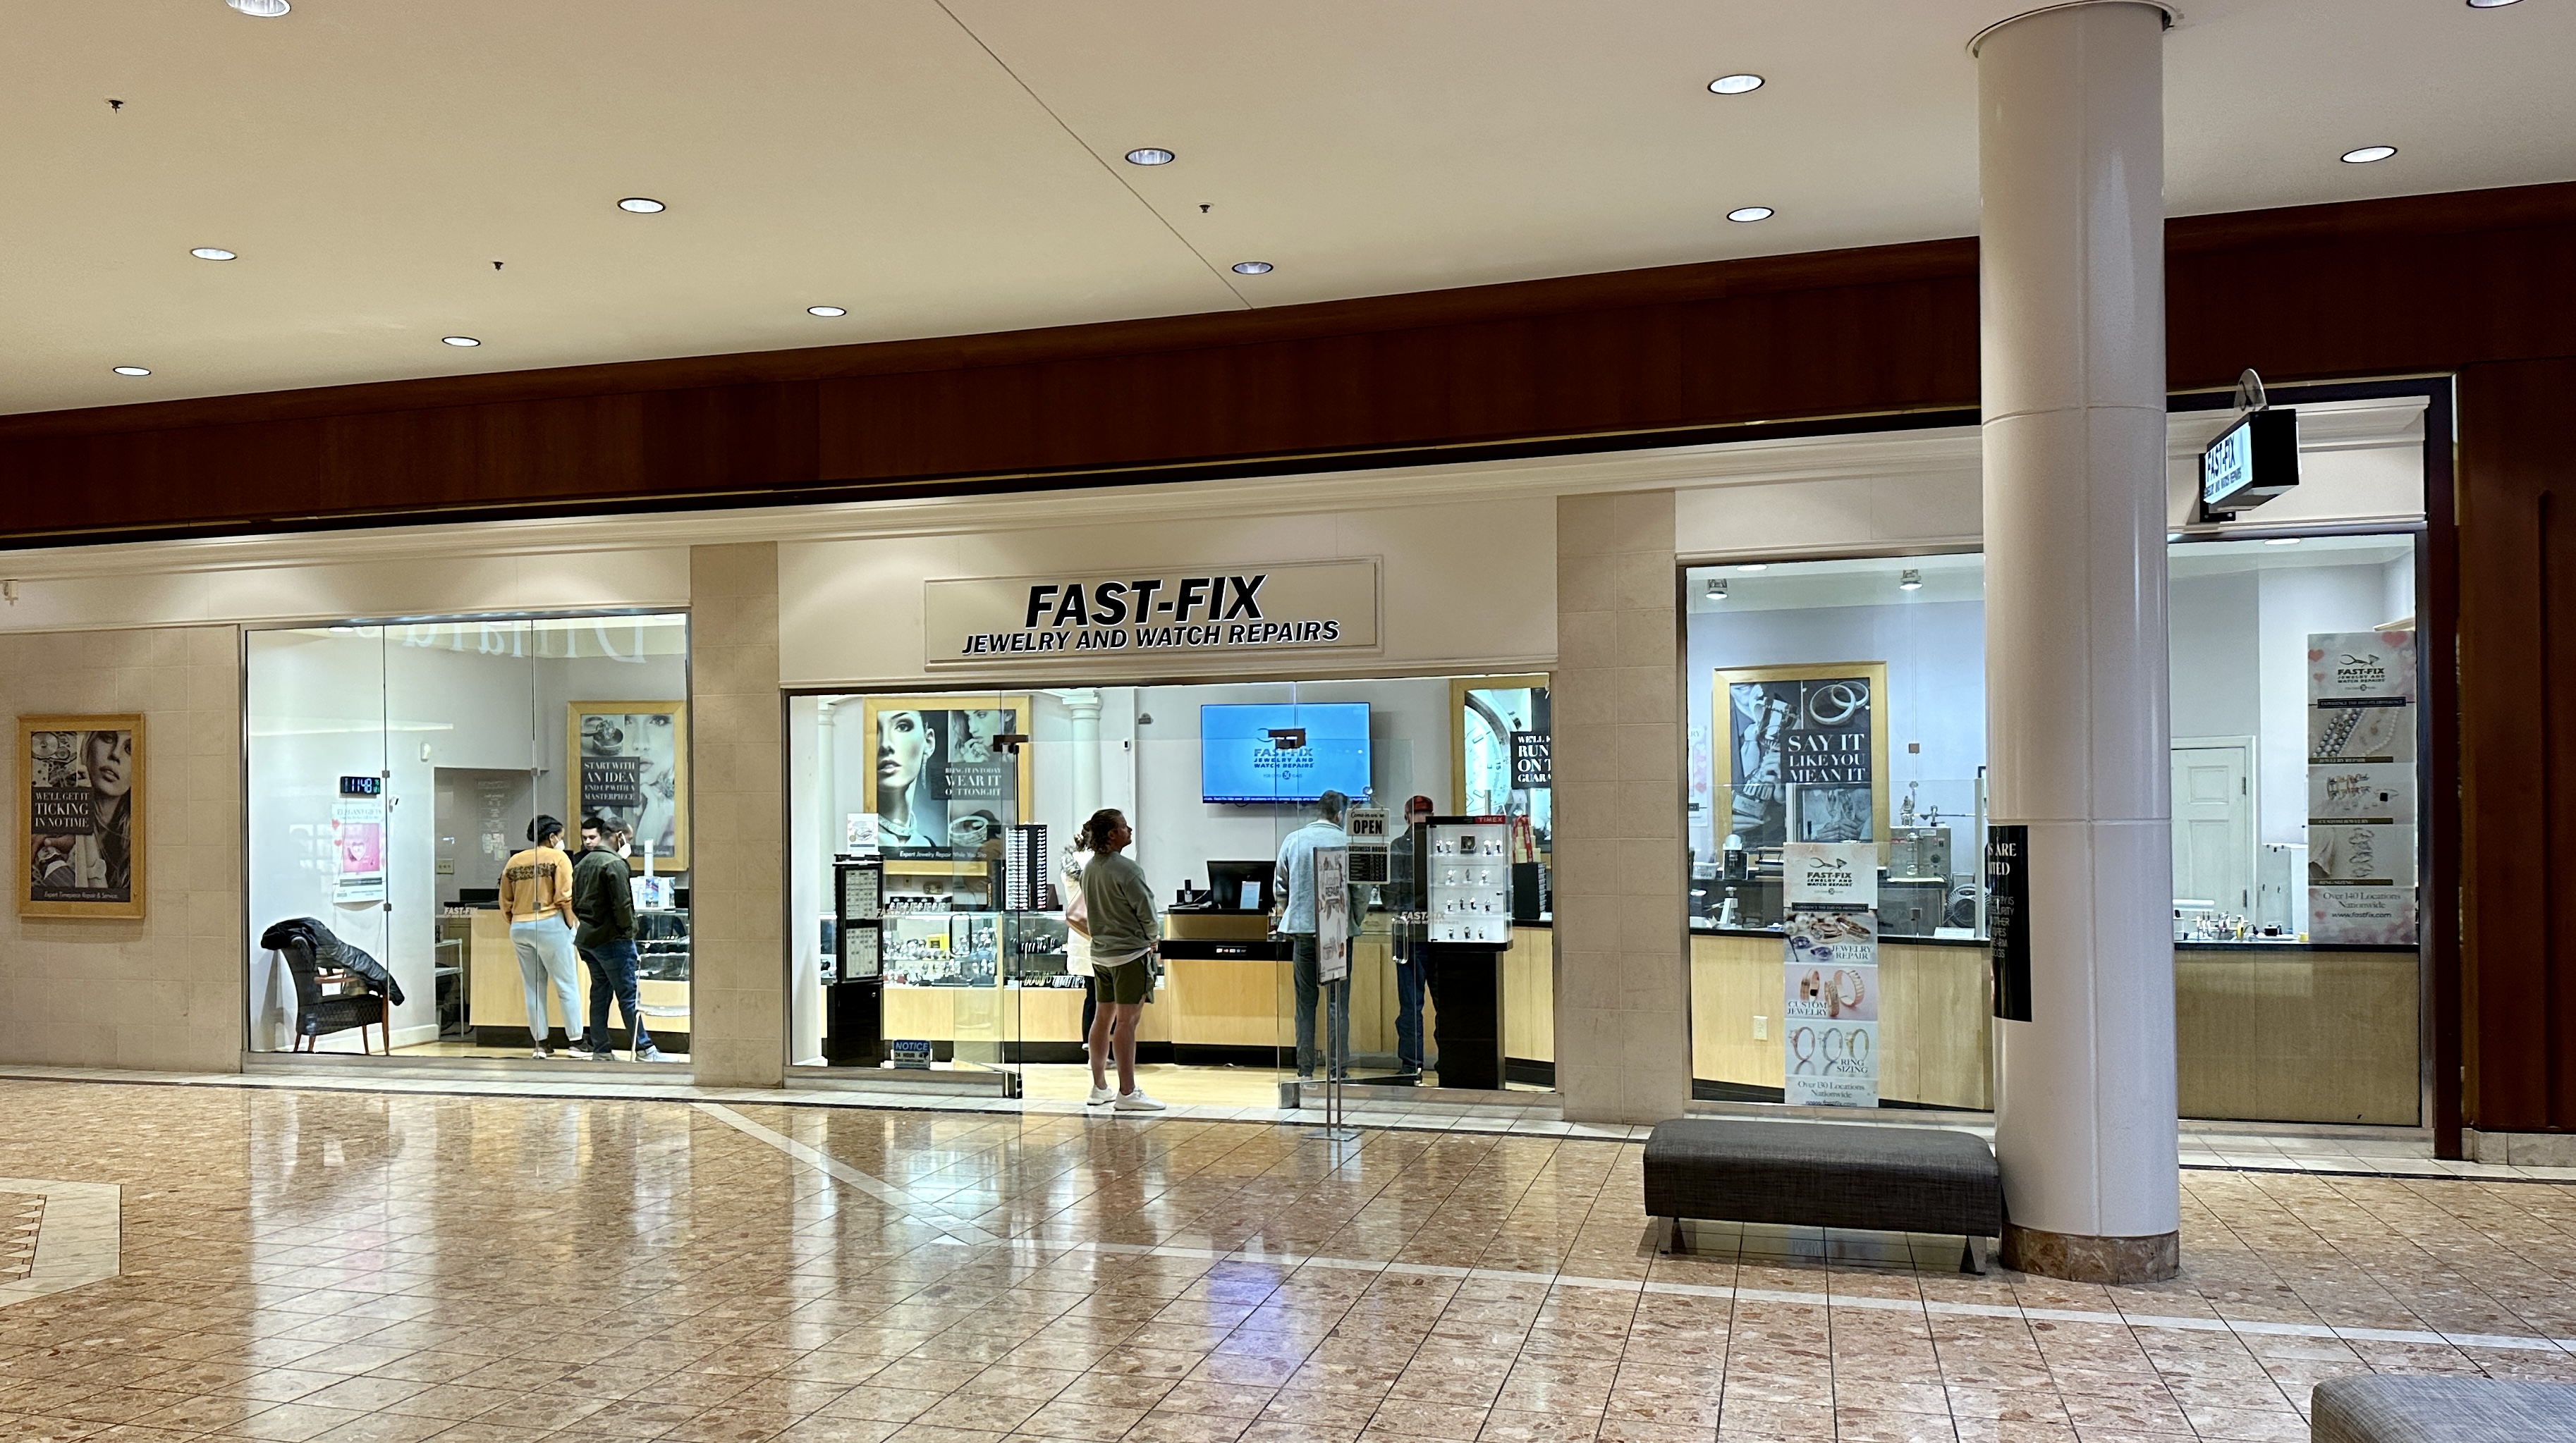 St Louis Galleria Mall - Storefront pic of Fast-Fix store